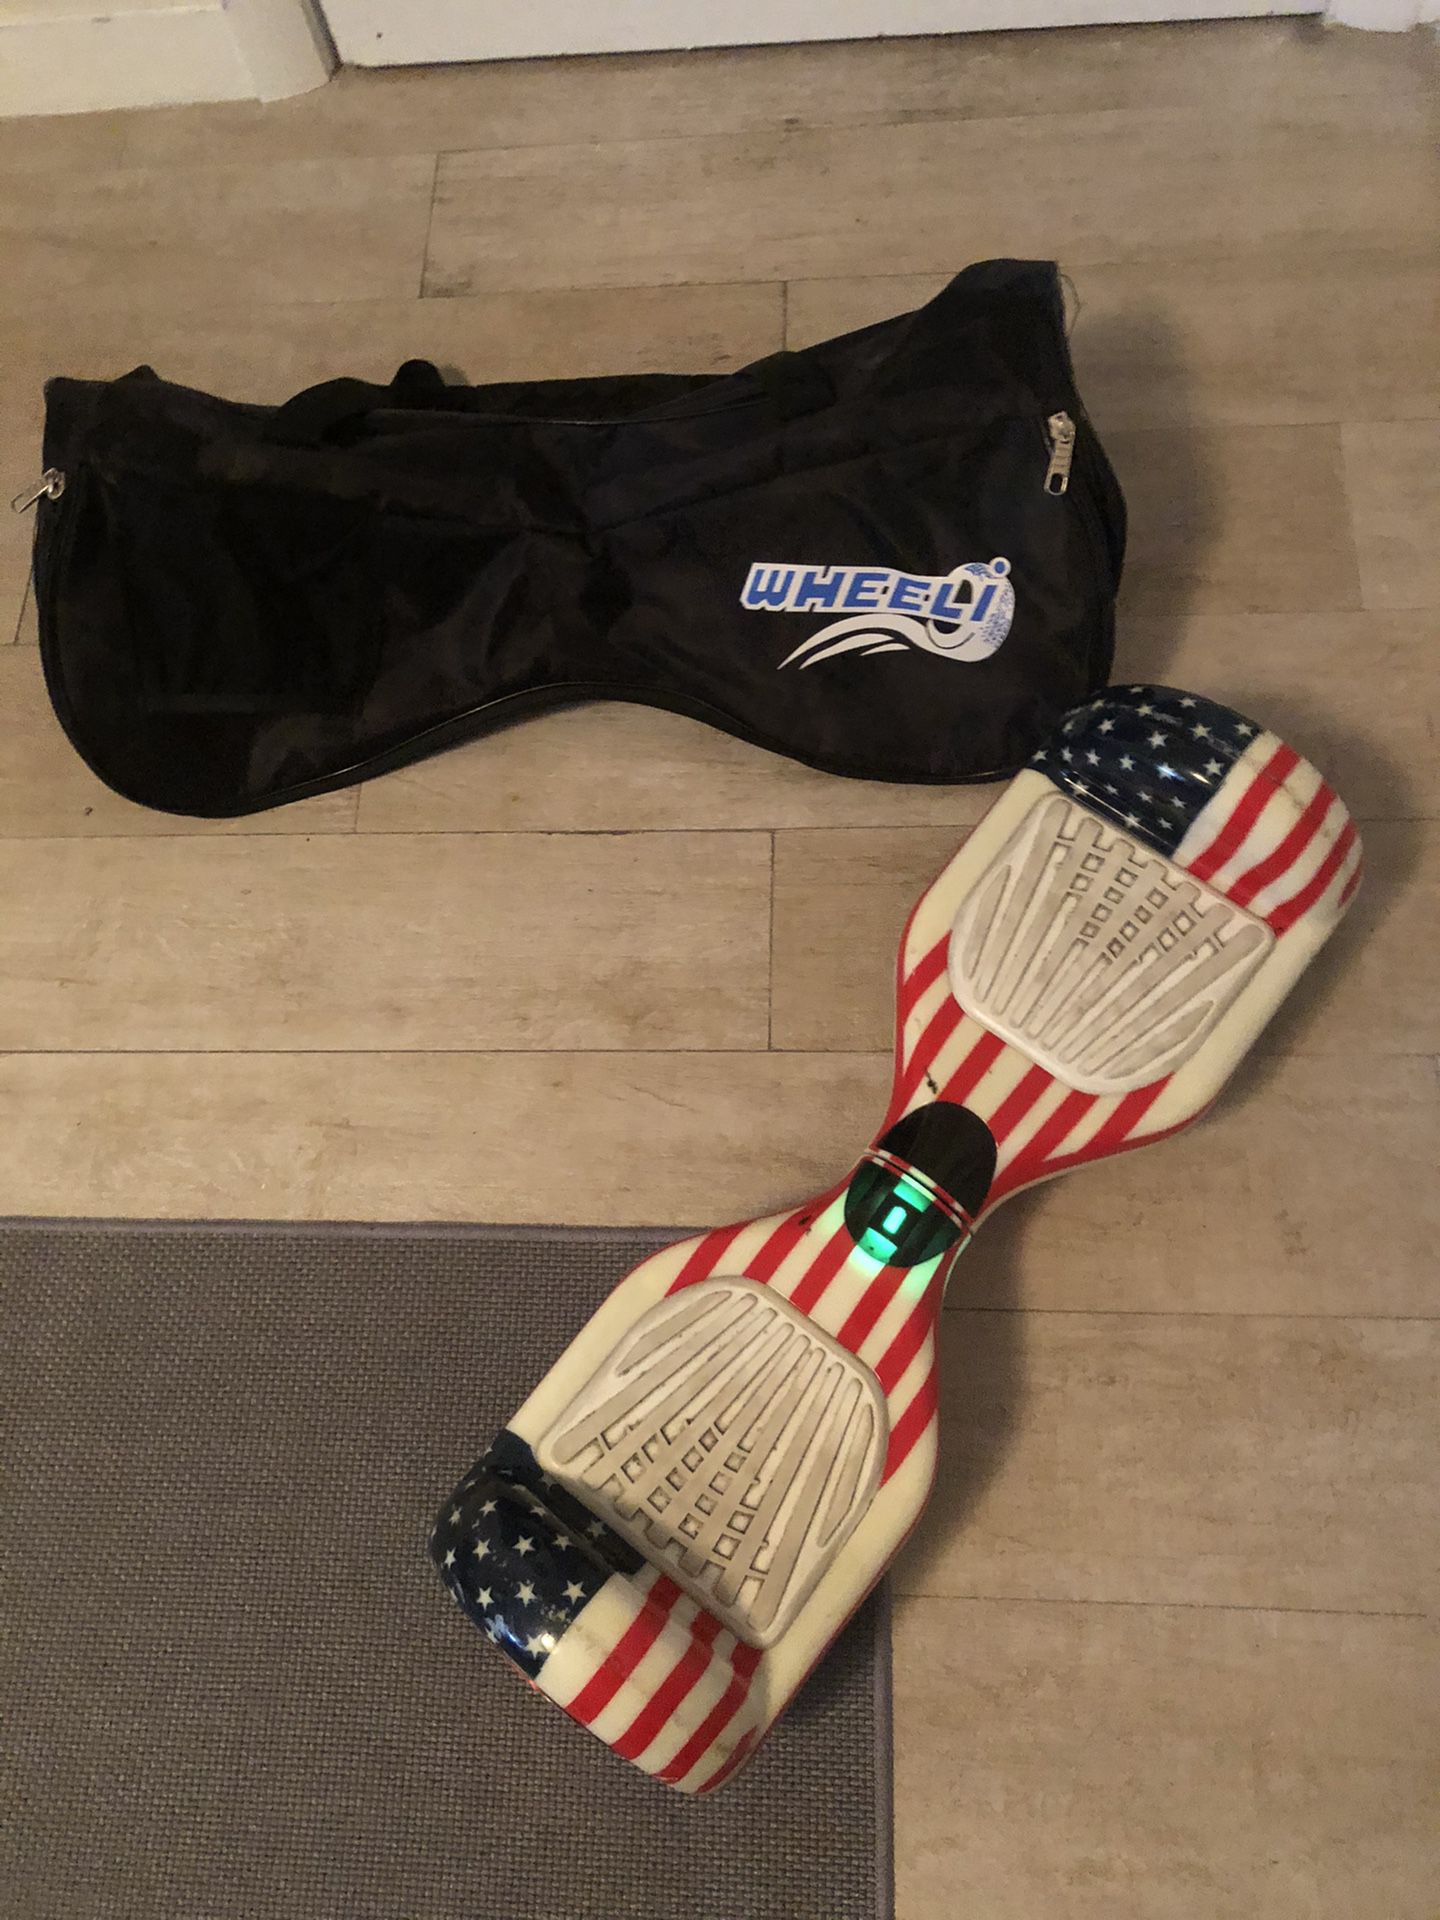 Wheeli Hoverboard American Flag Shell (Charger and bag included)